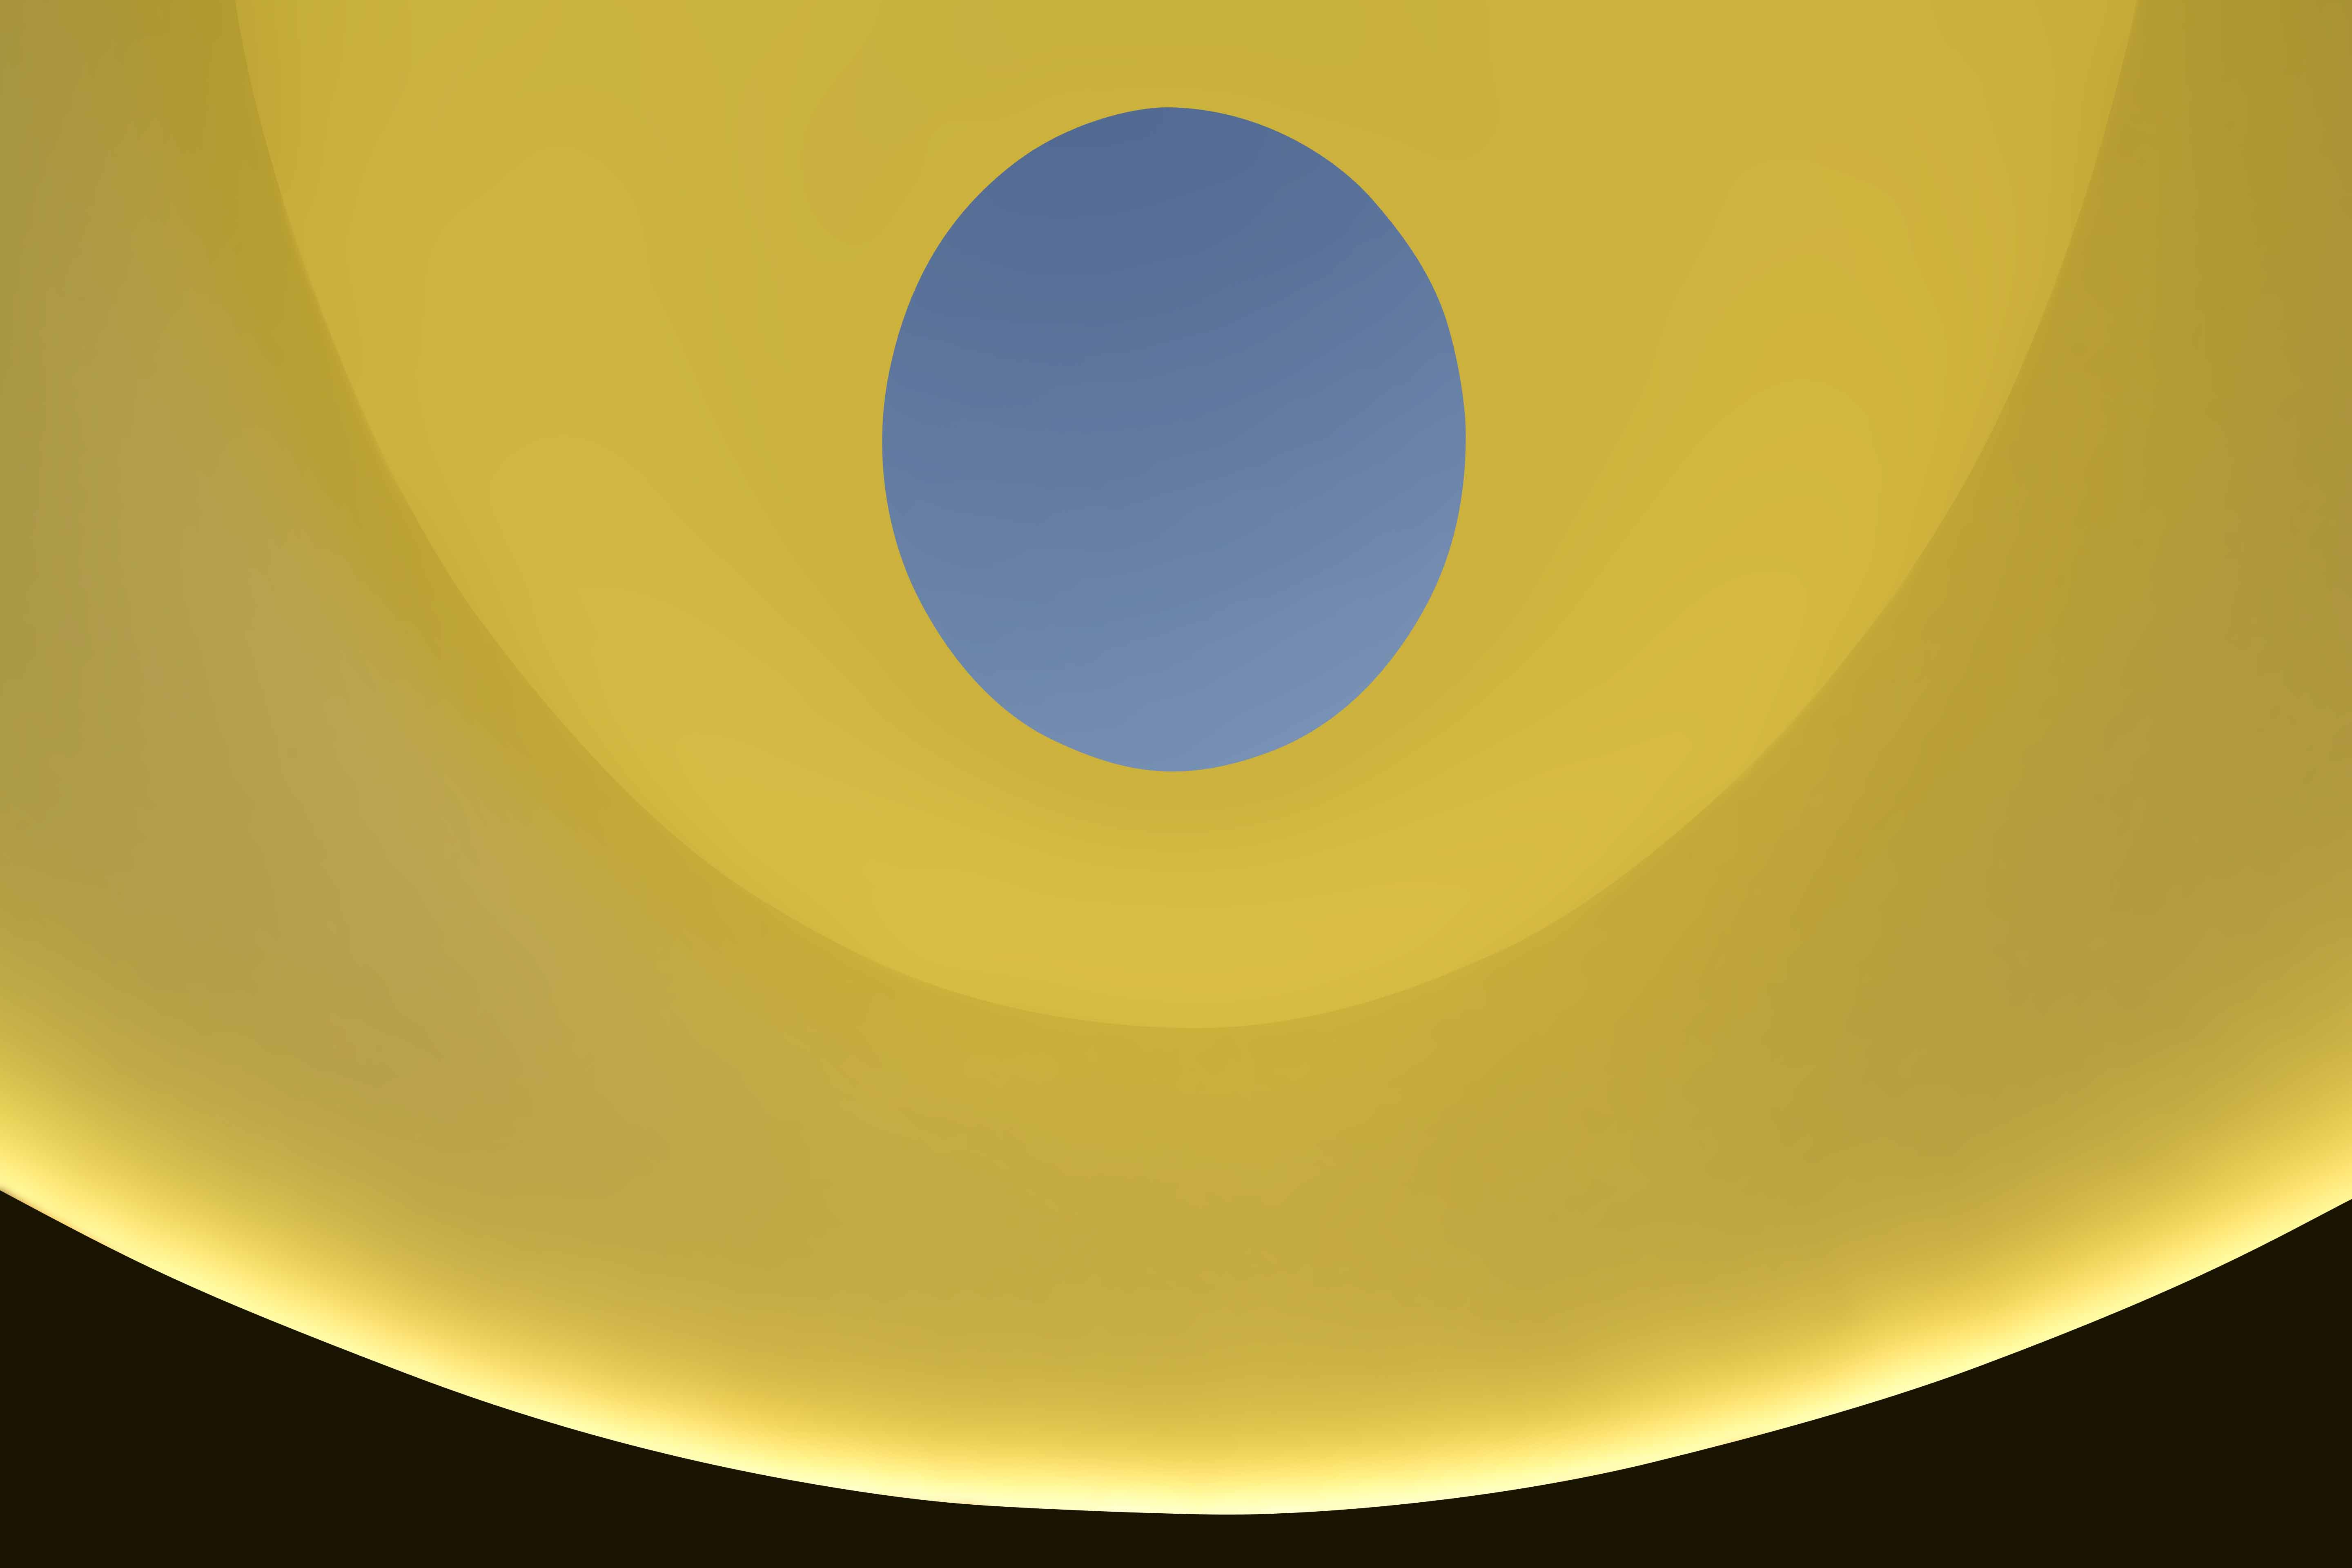 An image of the interior of James Turrell's skyspace with yellow color lighting the walls, turning the visible sky blue through the oculus.